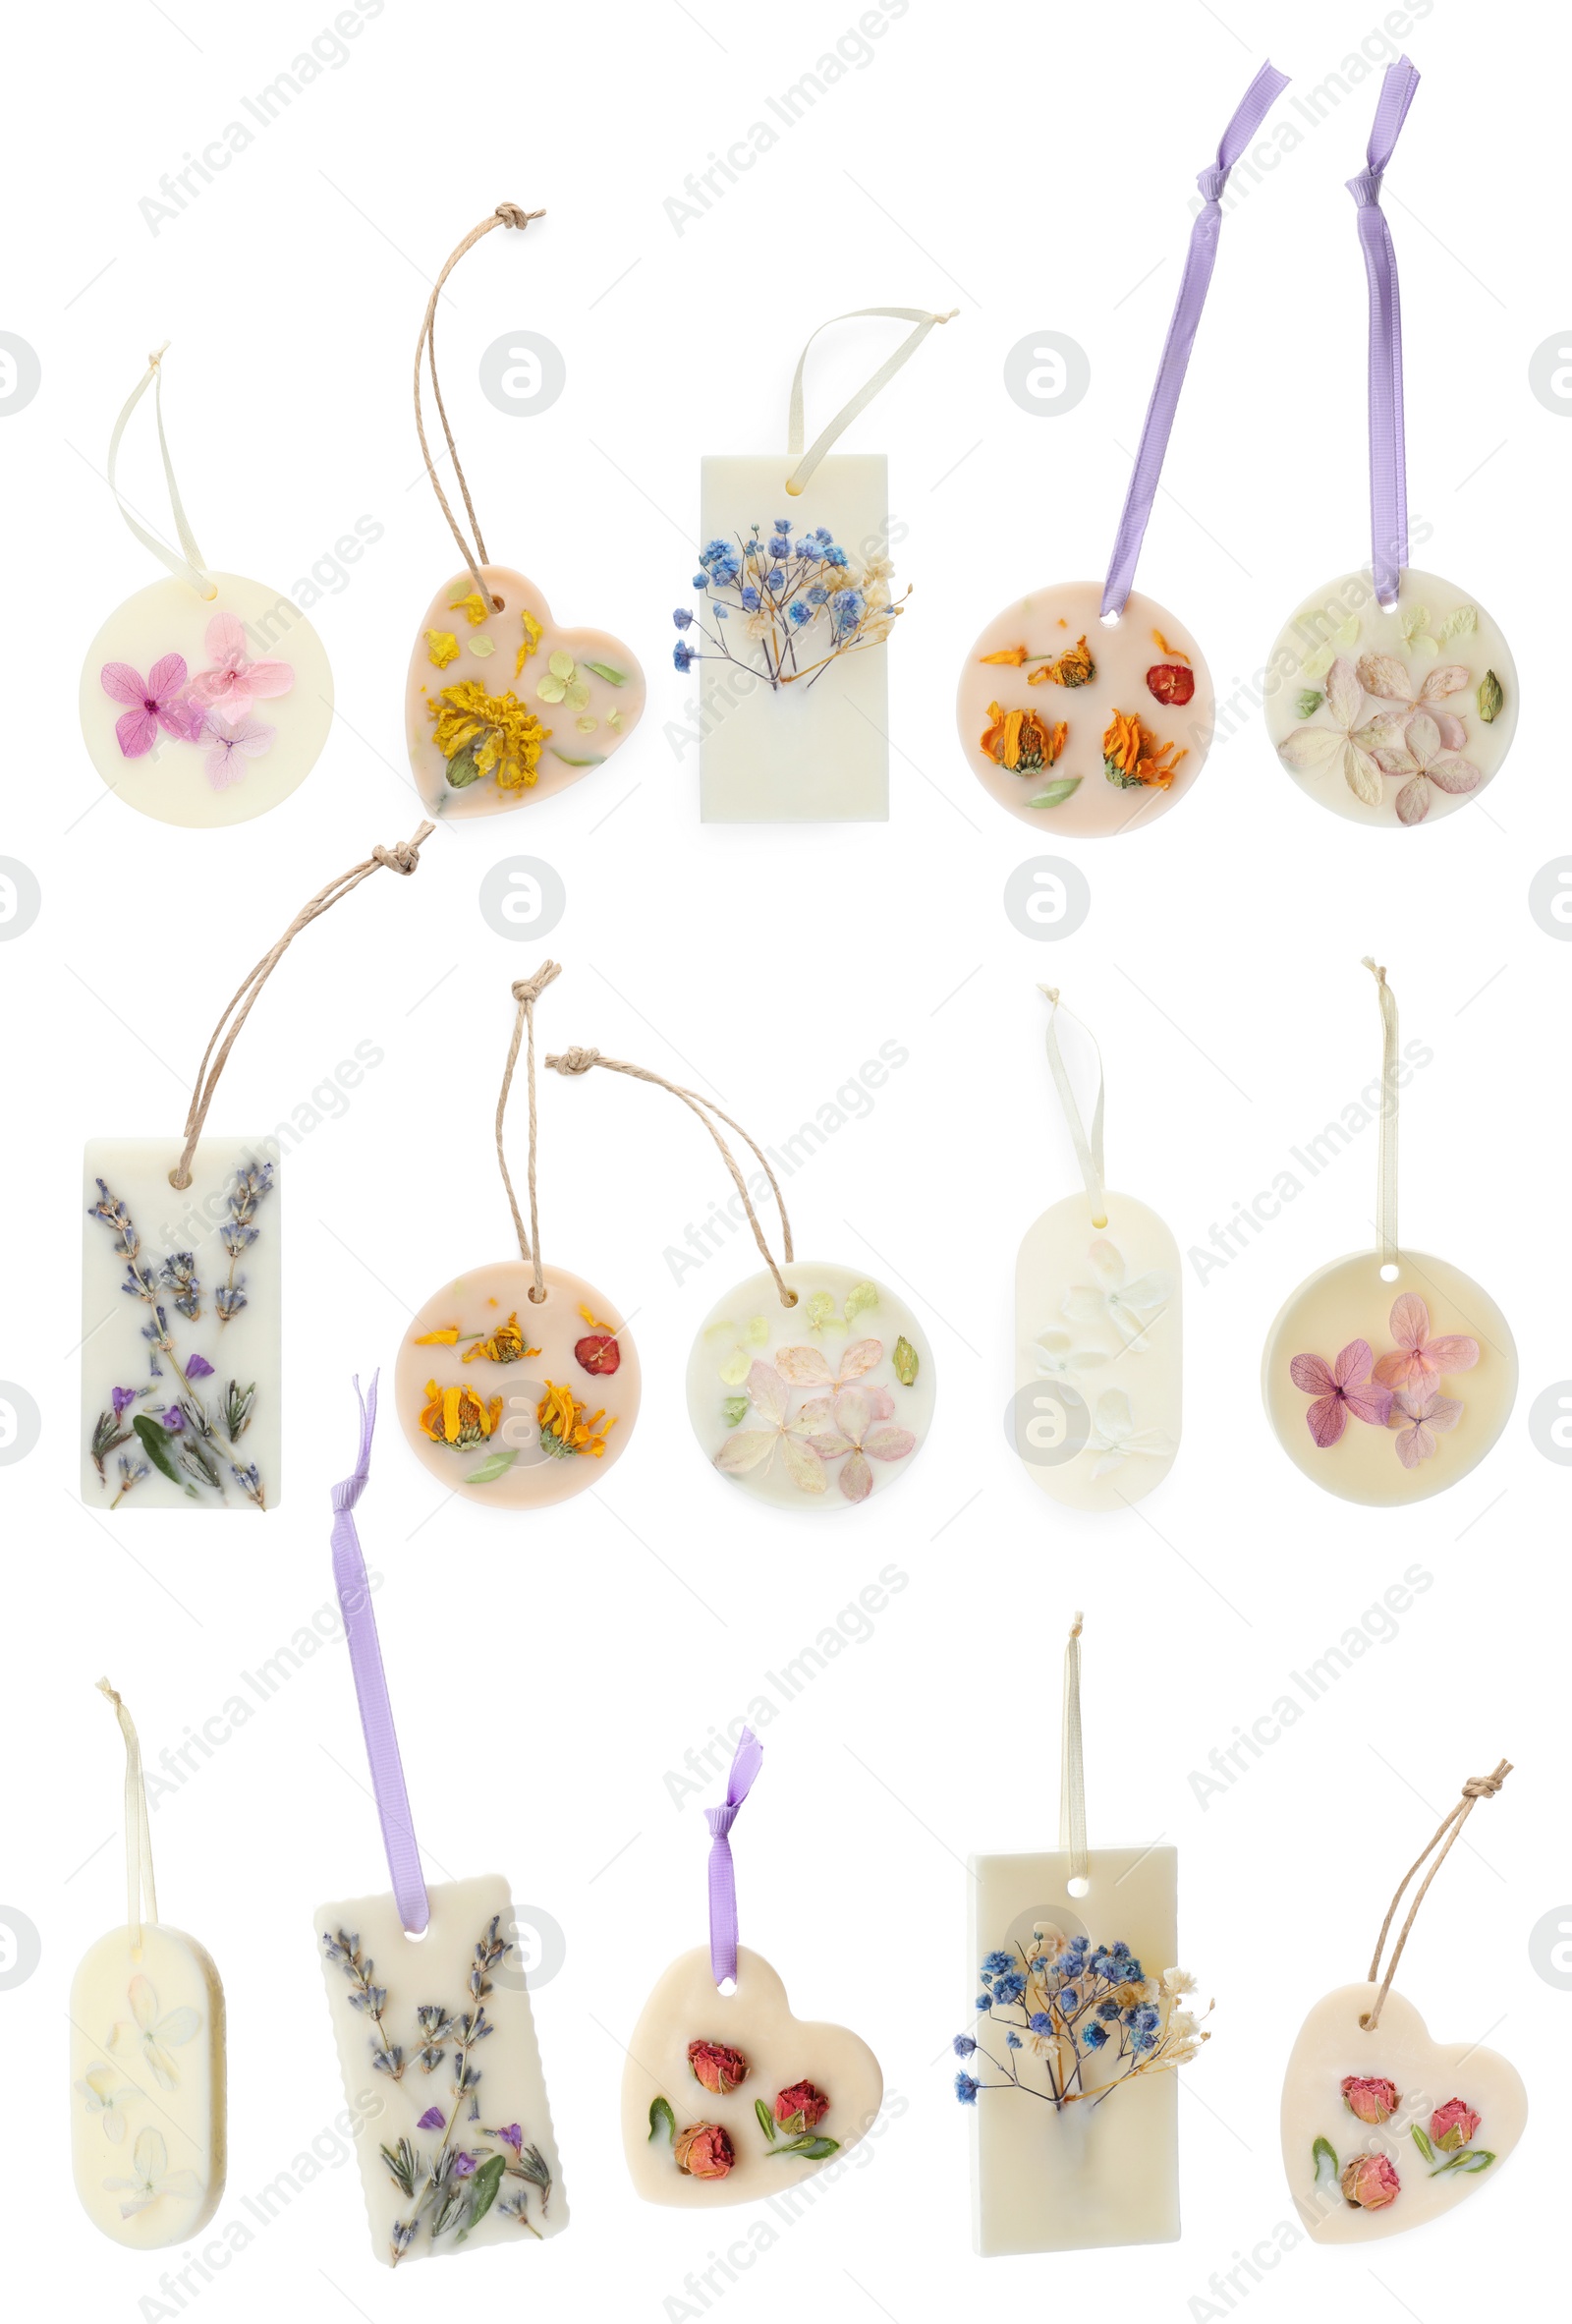 Image of Beautiful scented sachets with dried flowers on white background, collage